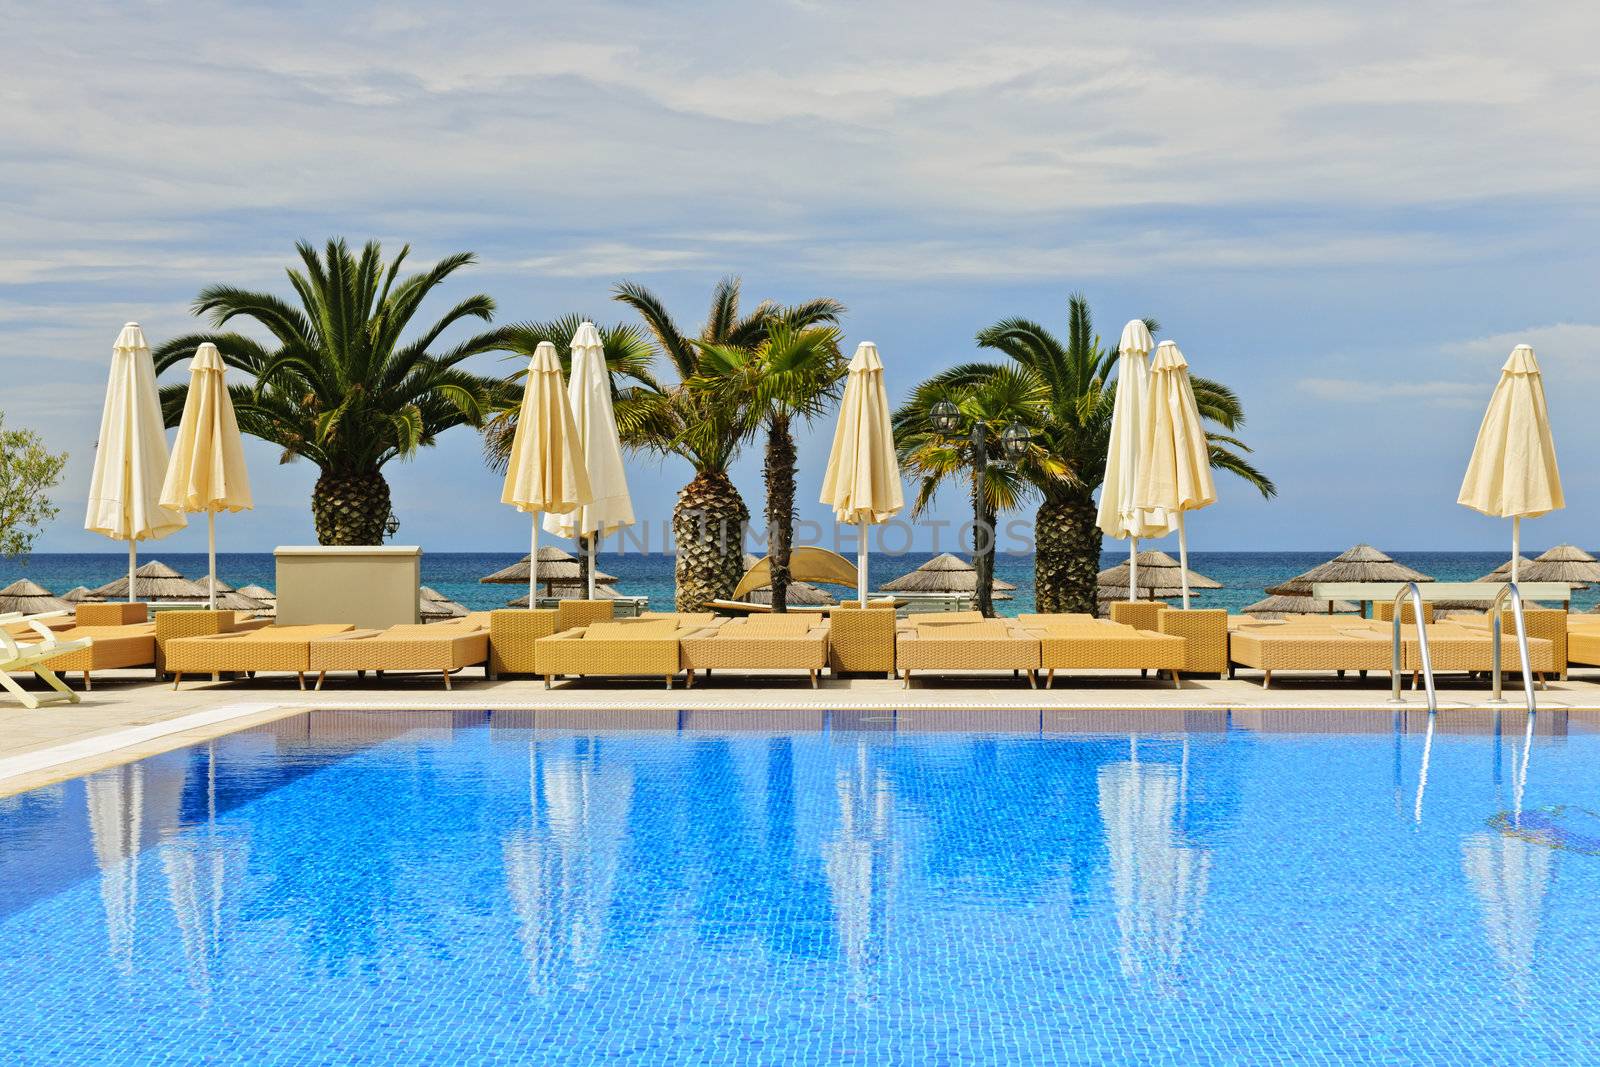 Idyllic swimming pool at tropical resort with palm trees in Greece